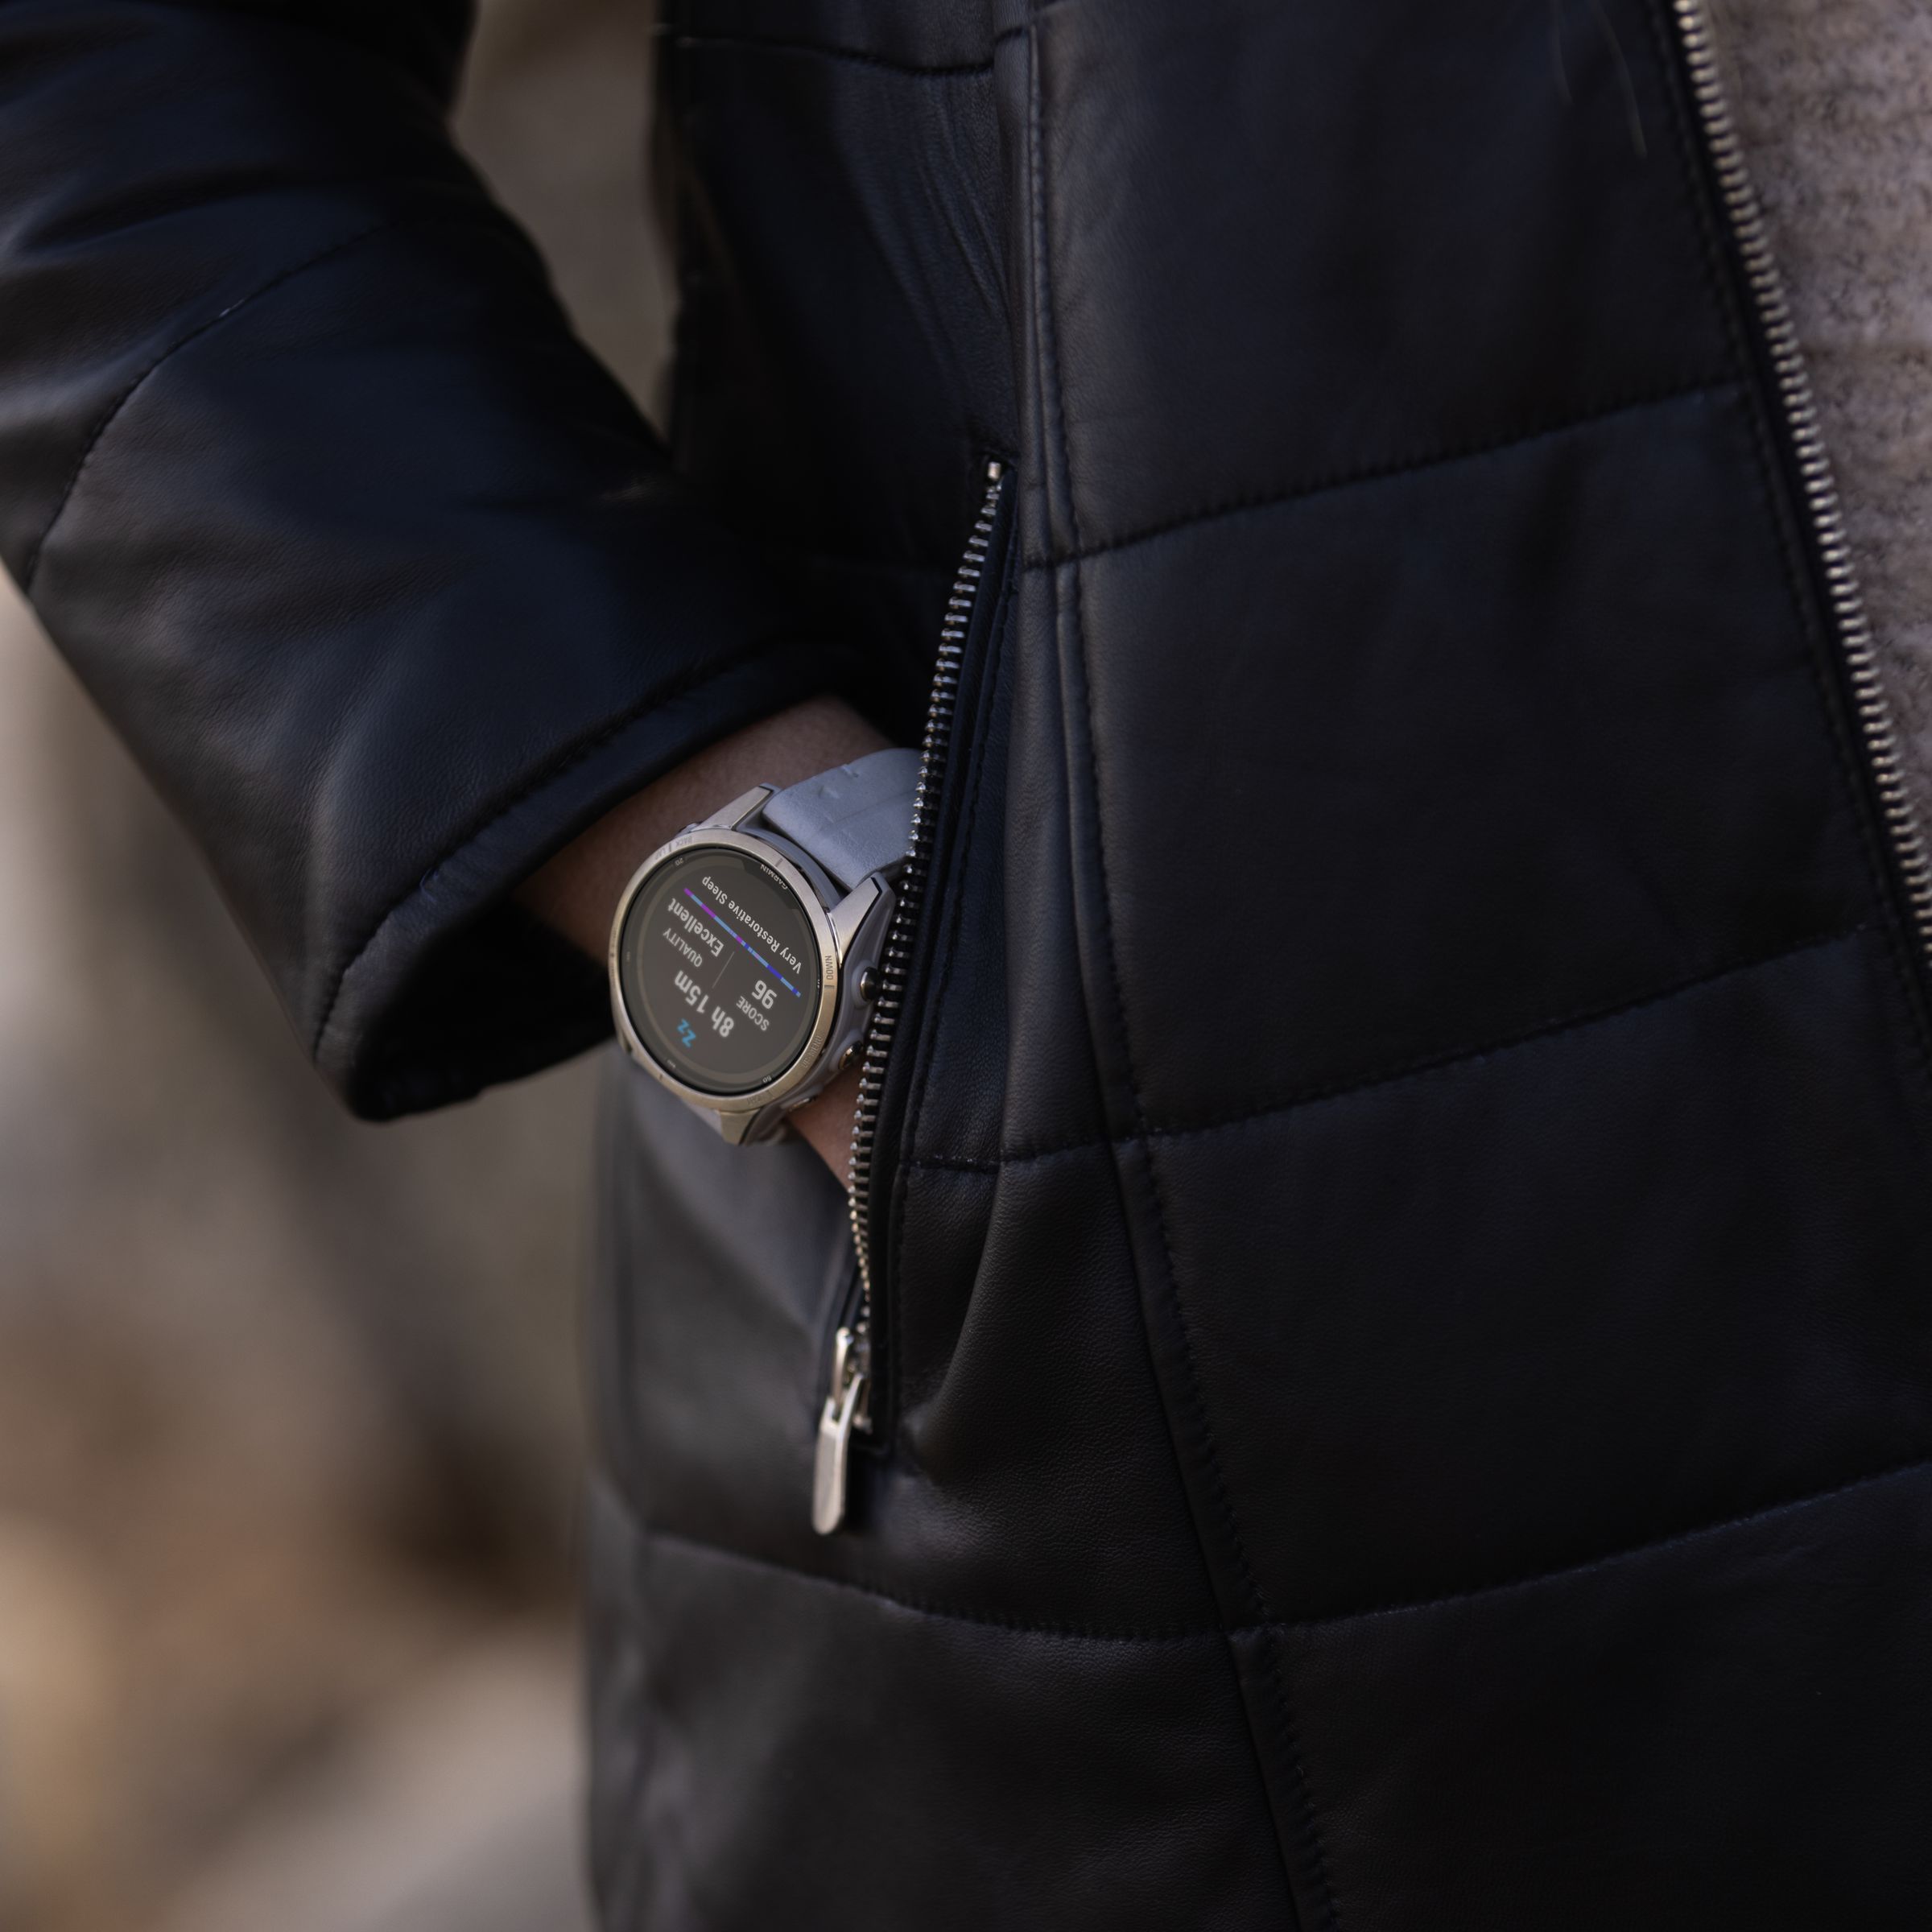 Close up of the Fenix 7 Pro worn on a wrist as someone puts their hand in a jacket pocket